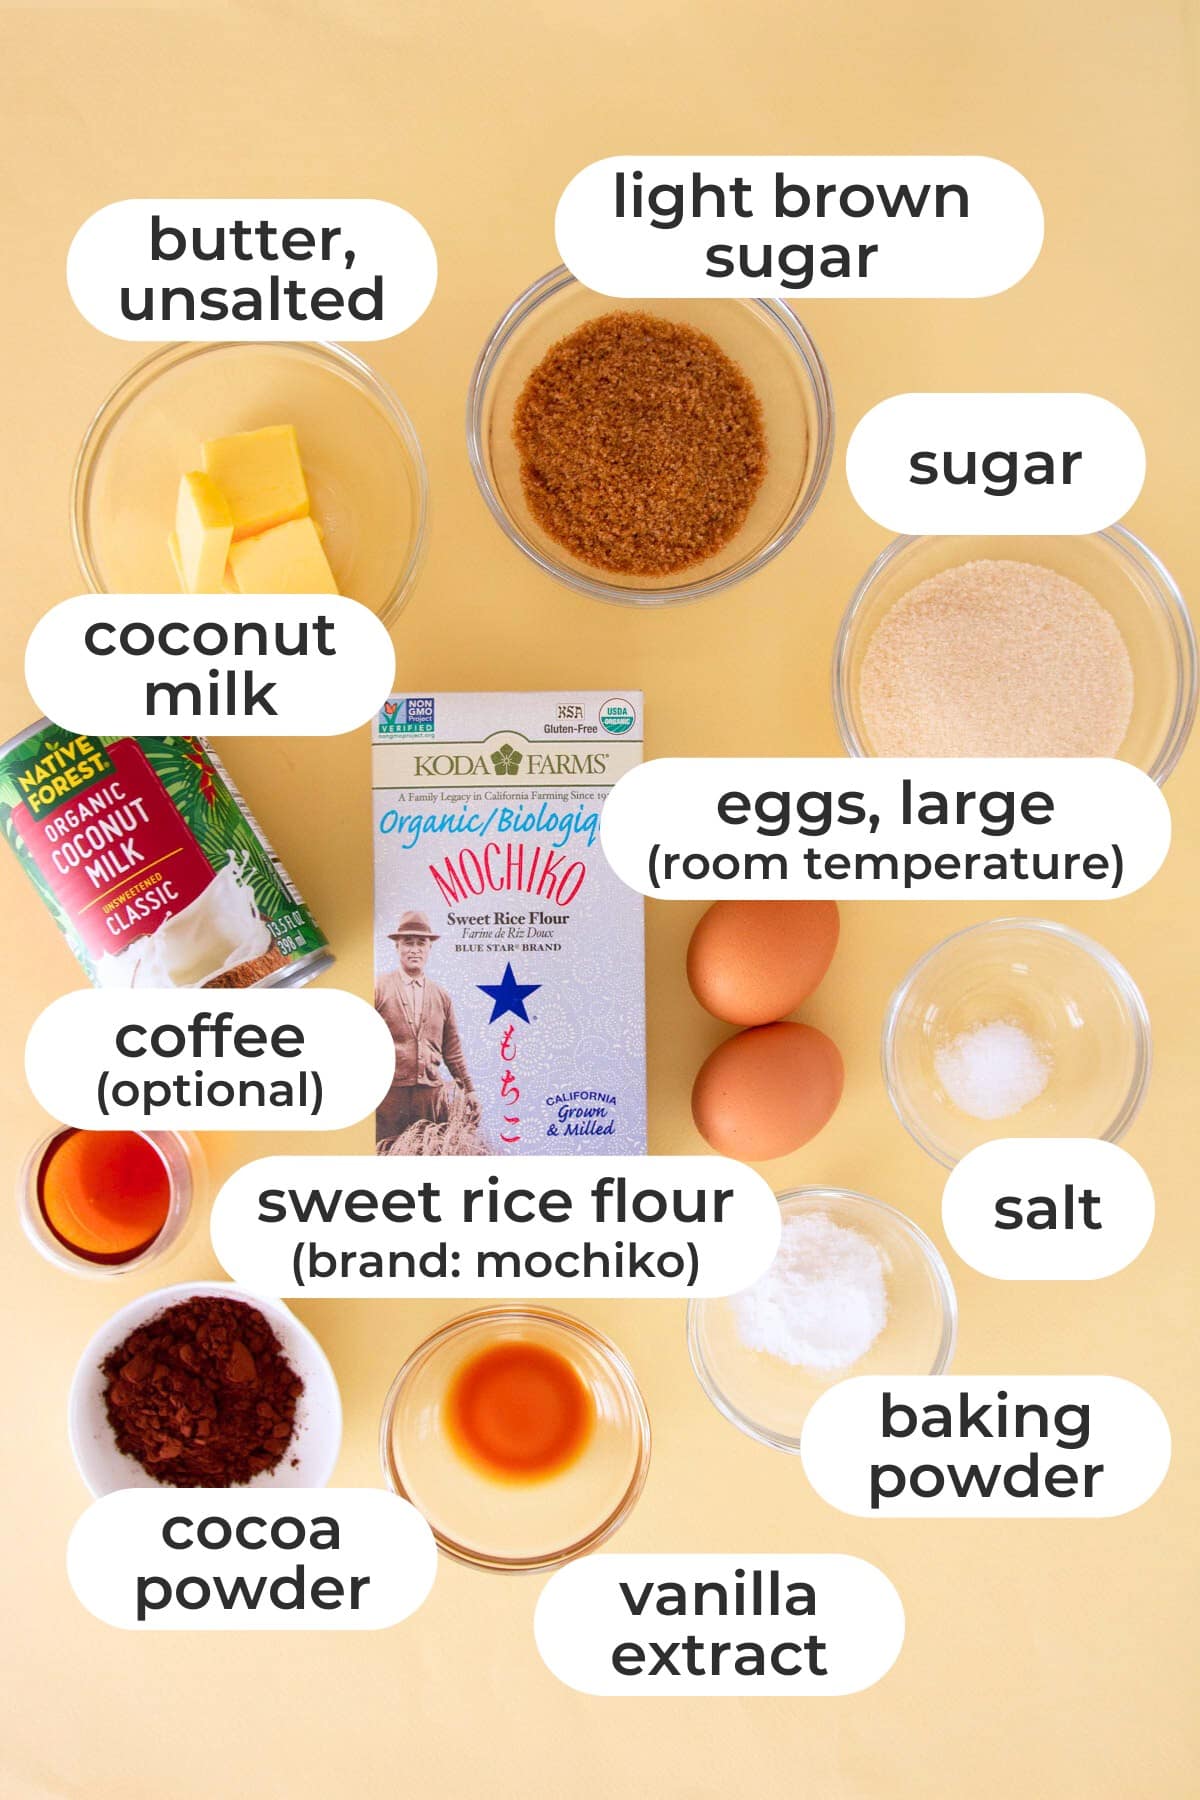 Labeled ingredients for chocolate mochi muffins over a yellow background, including unsalted butter, light brown sugar, sugar, coconut milk, eggs (room temperature), coffee (optional), sweet rice flour (brand: mochiko), salt, cocoa powder, vanilla extract, and baking powder.